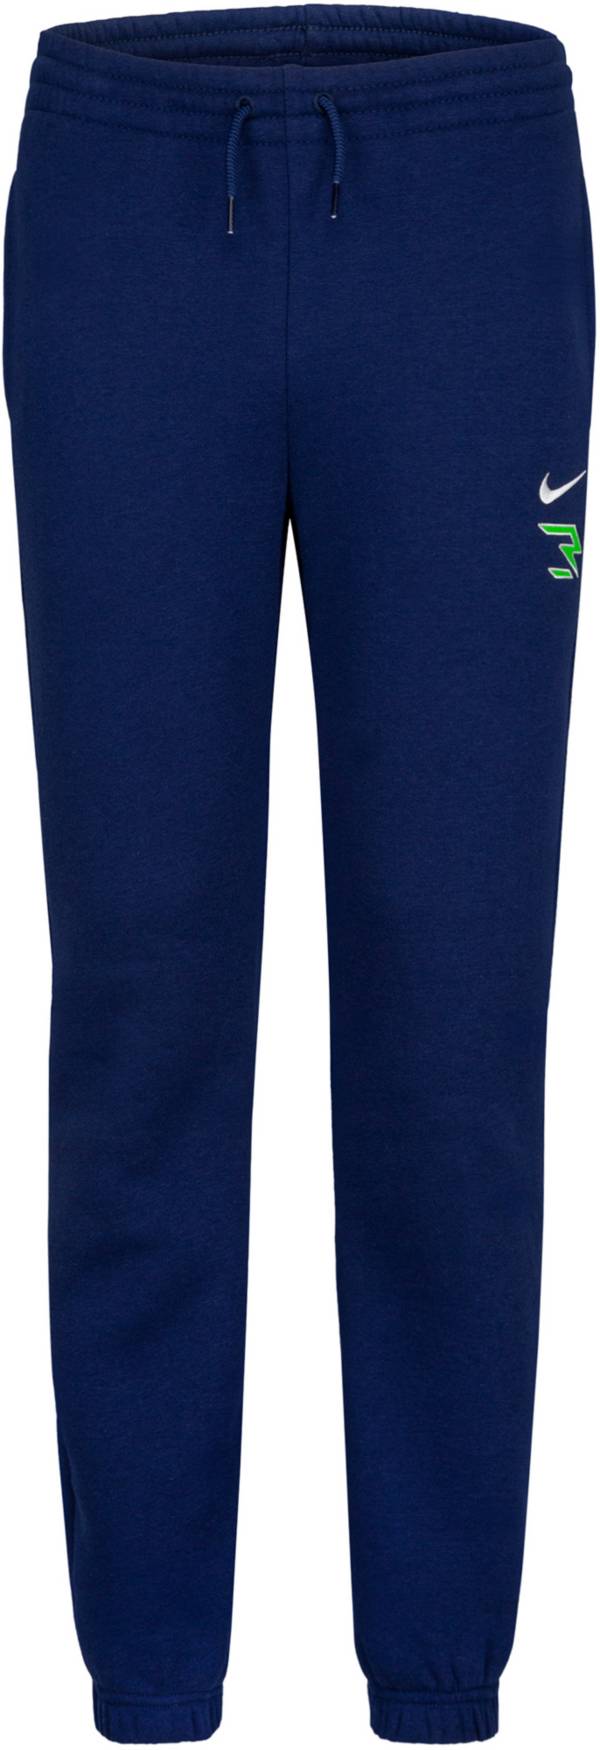 Nike 3BRAND by Russell Wilson Youth 4th Quarter Pants product image